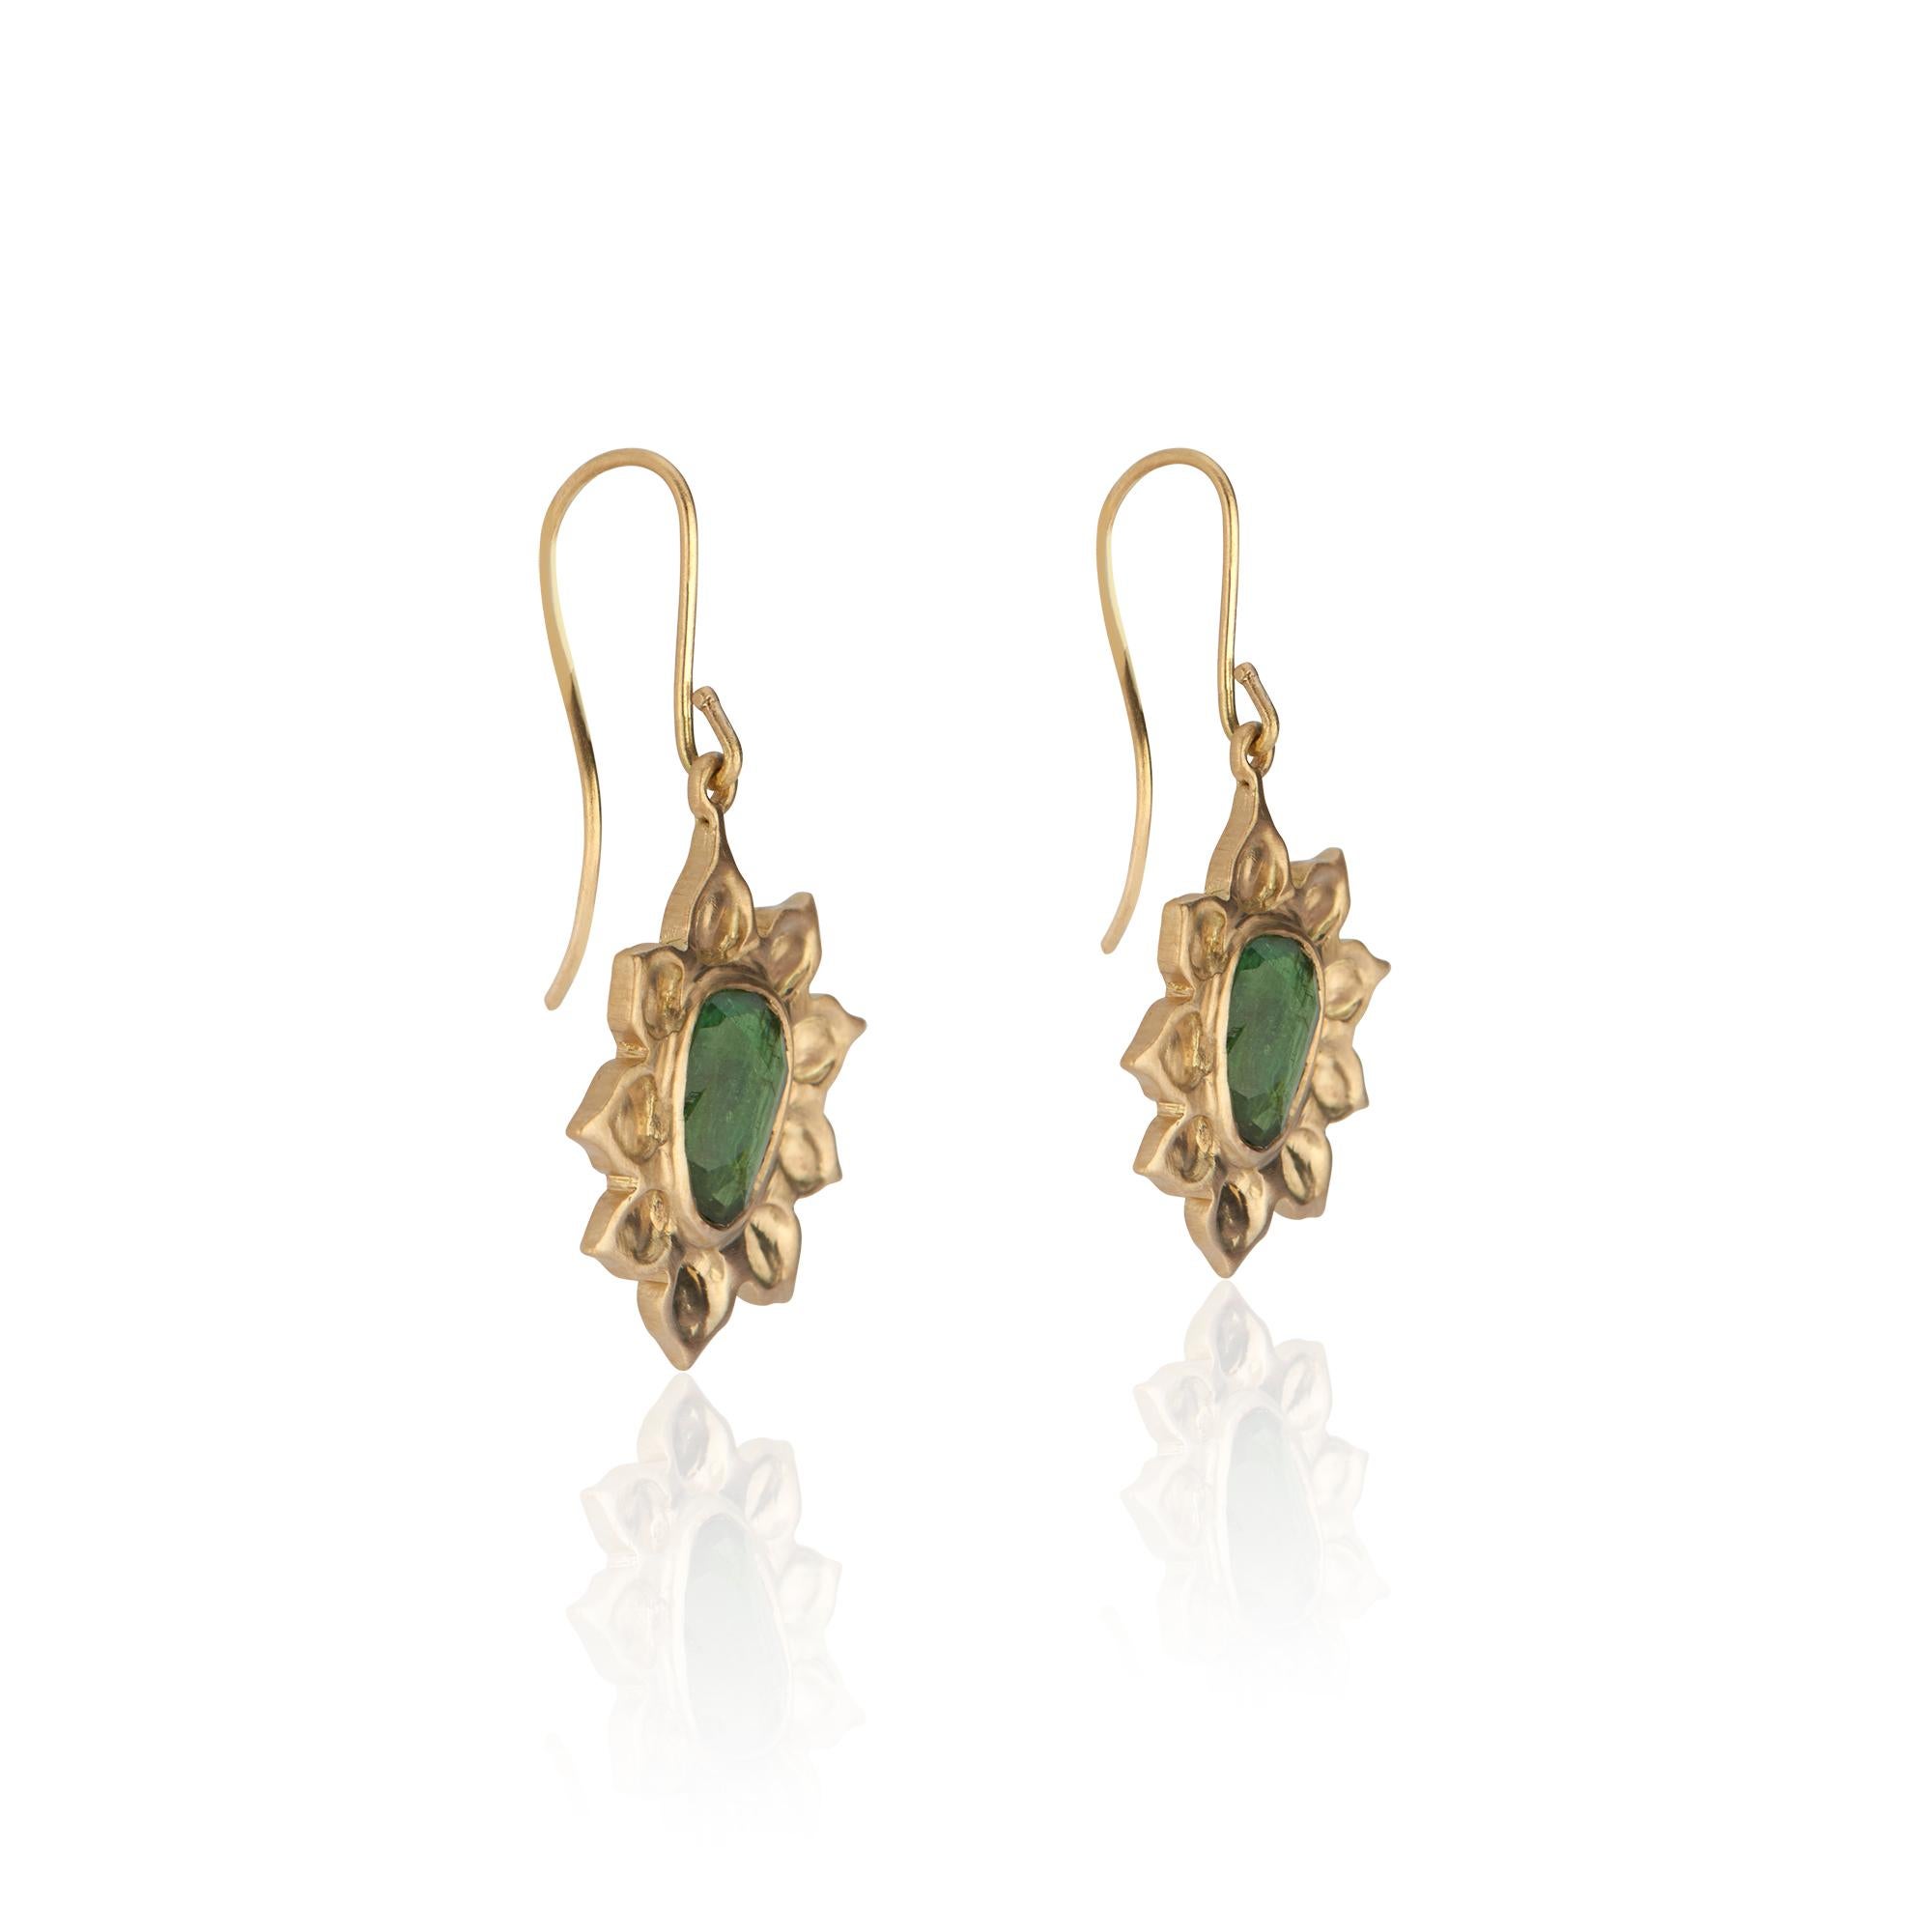 18k yellow gold pendant earrings
Organic-shape rose cut moss-green tourmalines
Tourmaline weight approximately 2.29 carats total carat weight
Approximately 1.75 inches (3.75 centimeters) long
18k yellow gold ear wires
Matte finish
Exclusive